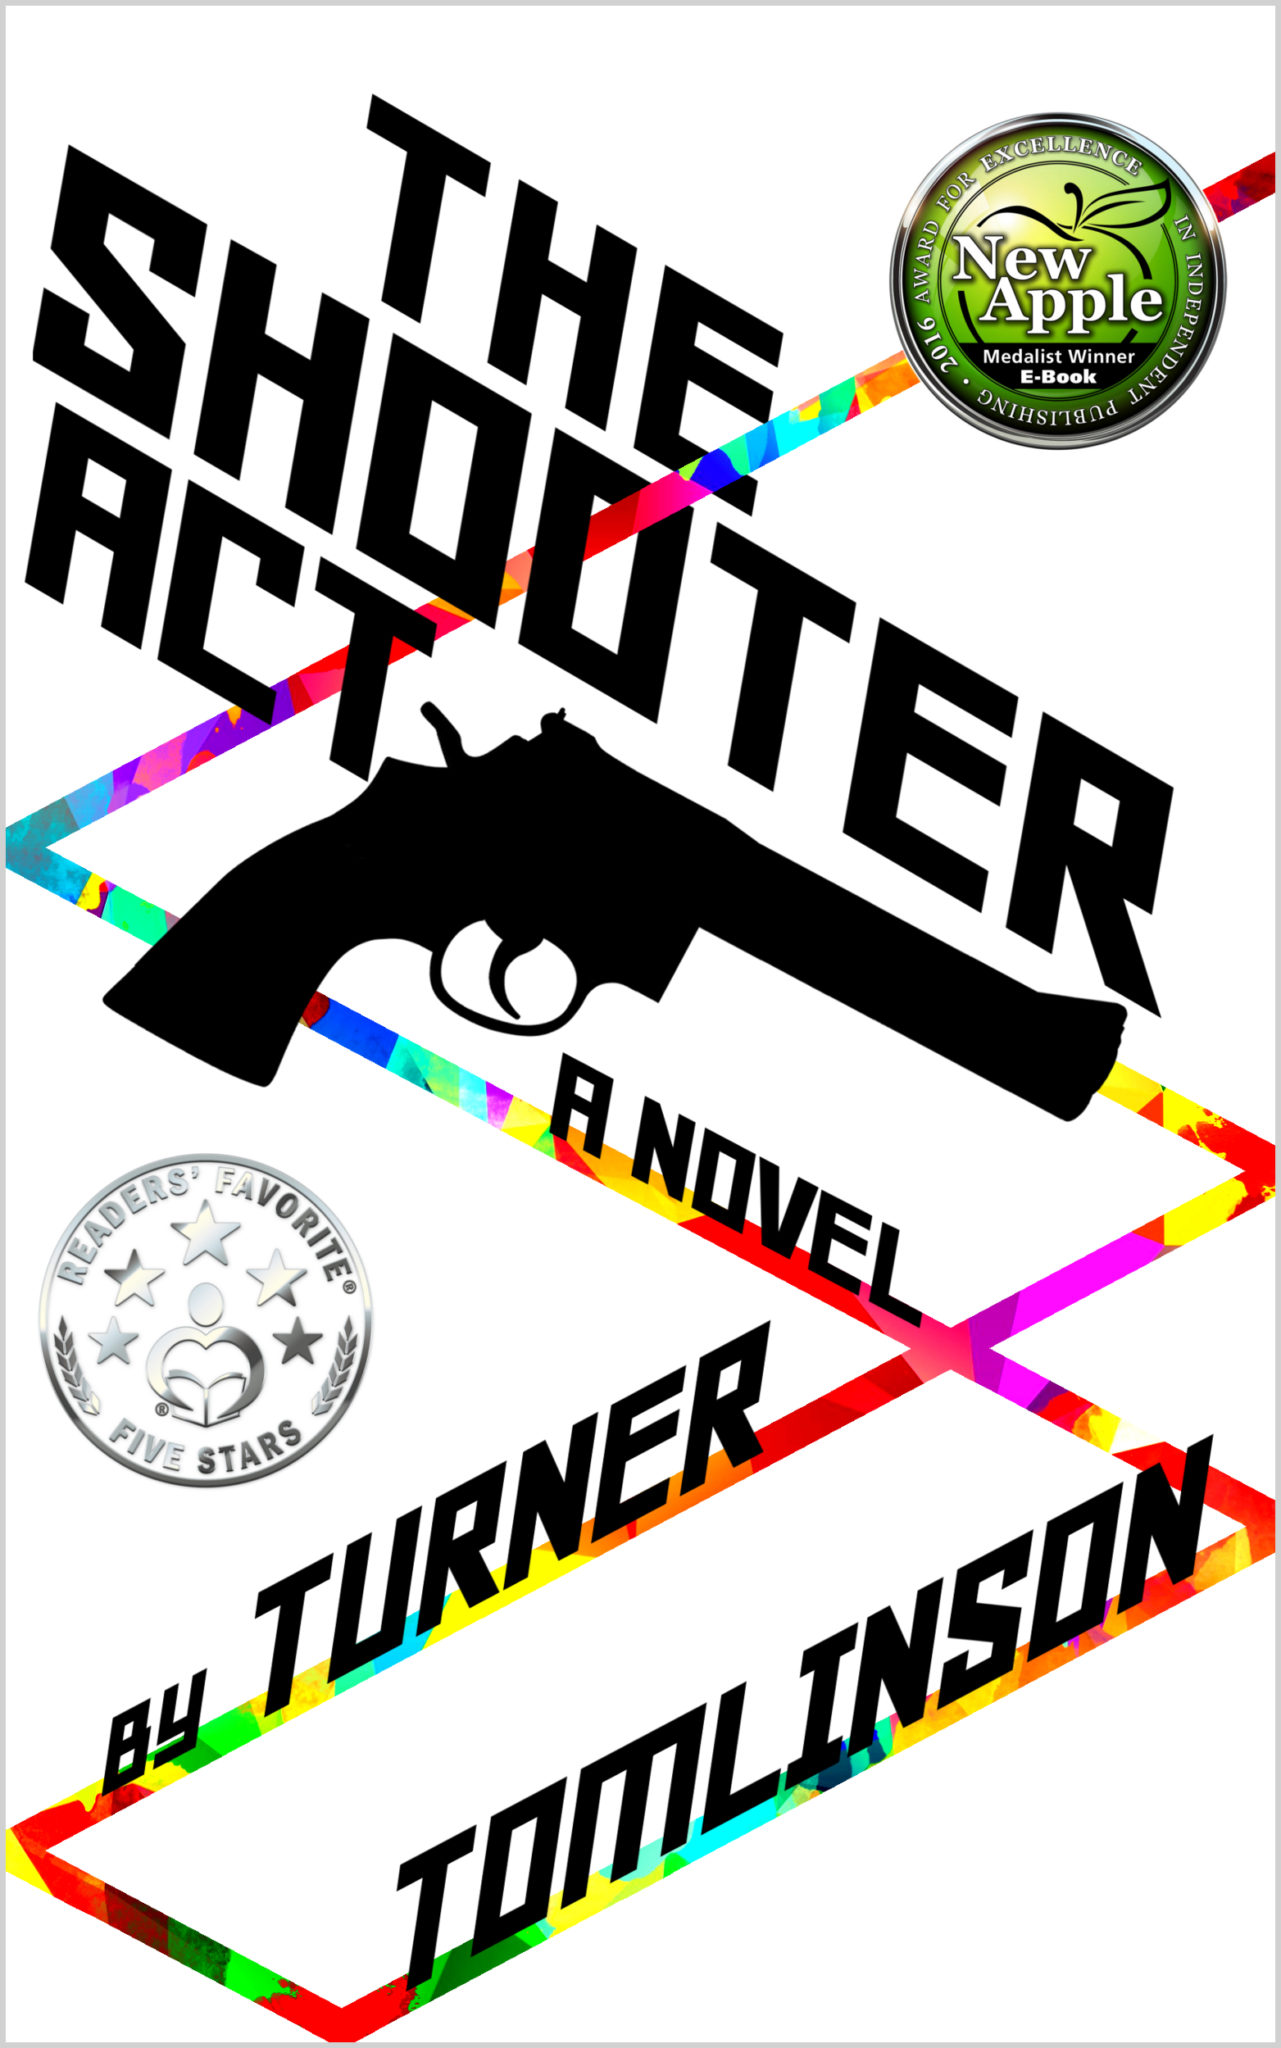 FREE: The Shooter Act by Turner Tomlinson